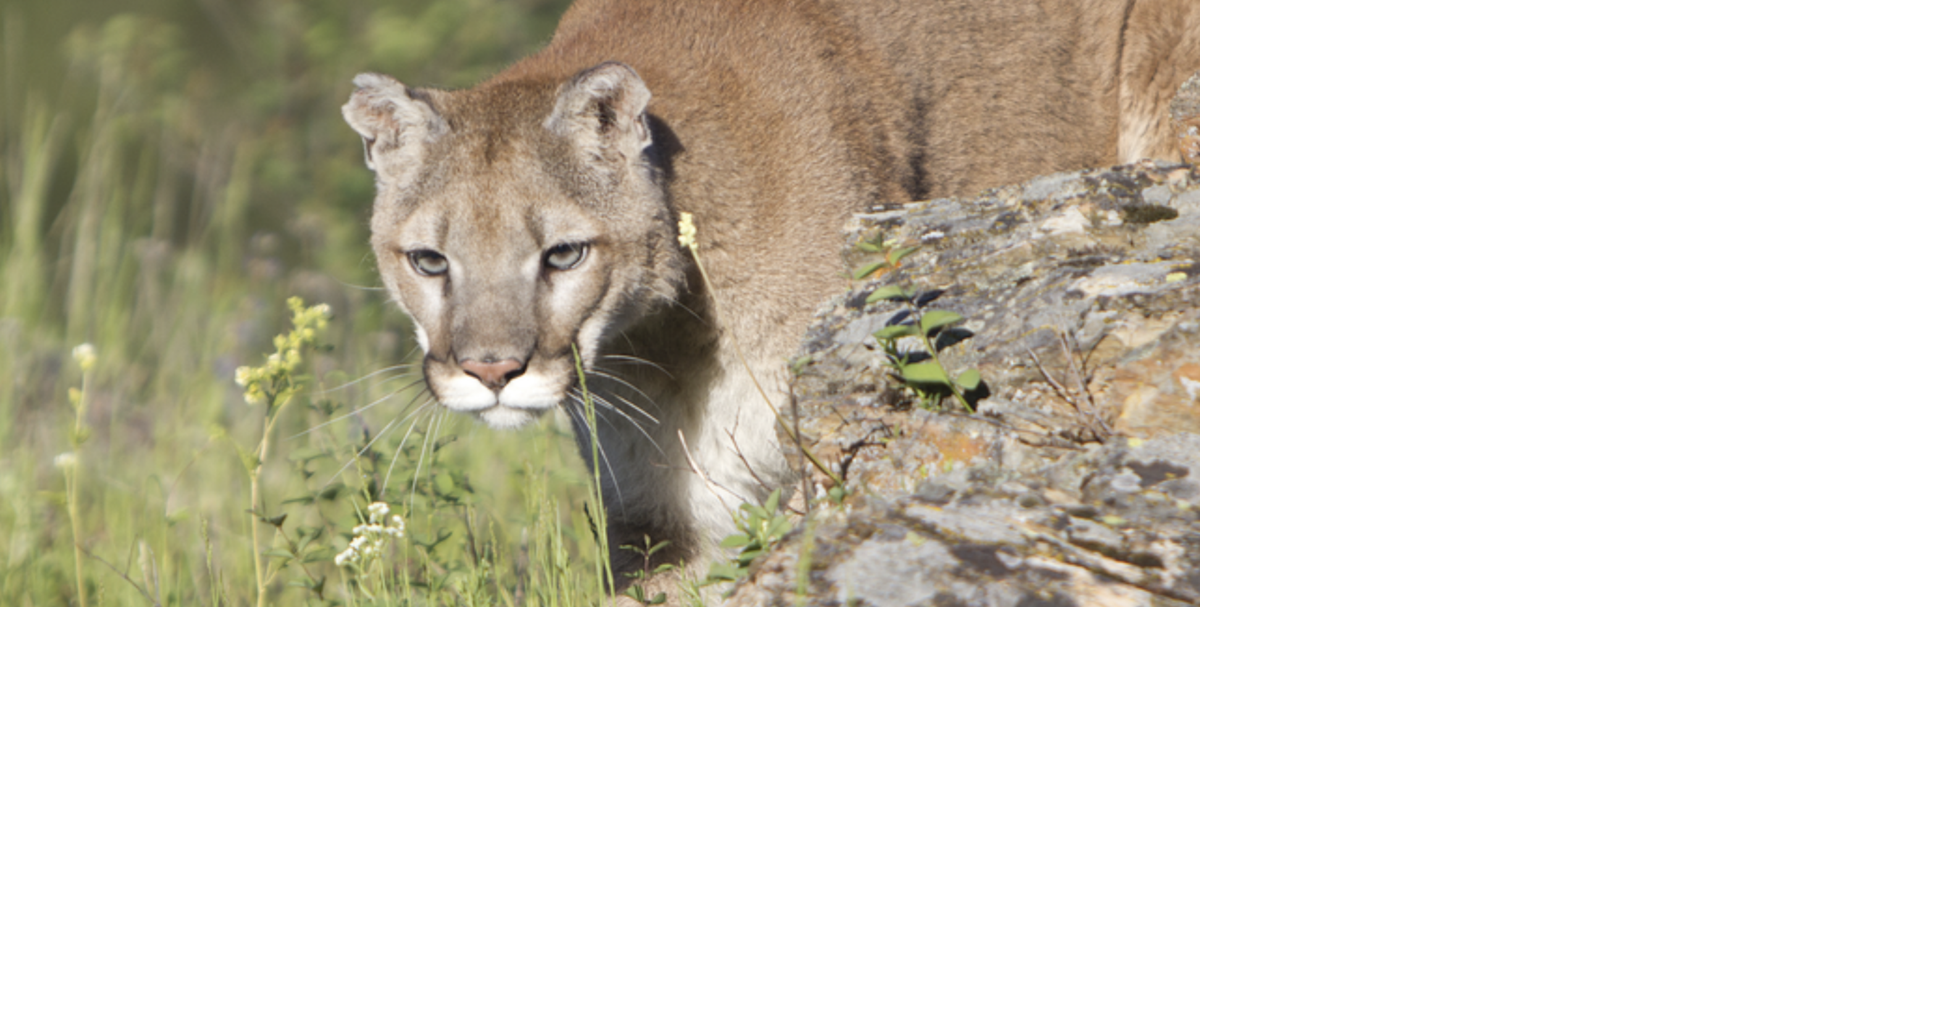 Idaho Fish and Game seeks public comment on proposed draft mountain lion management plan